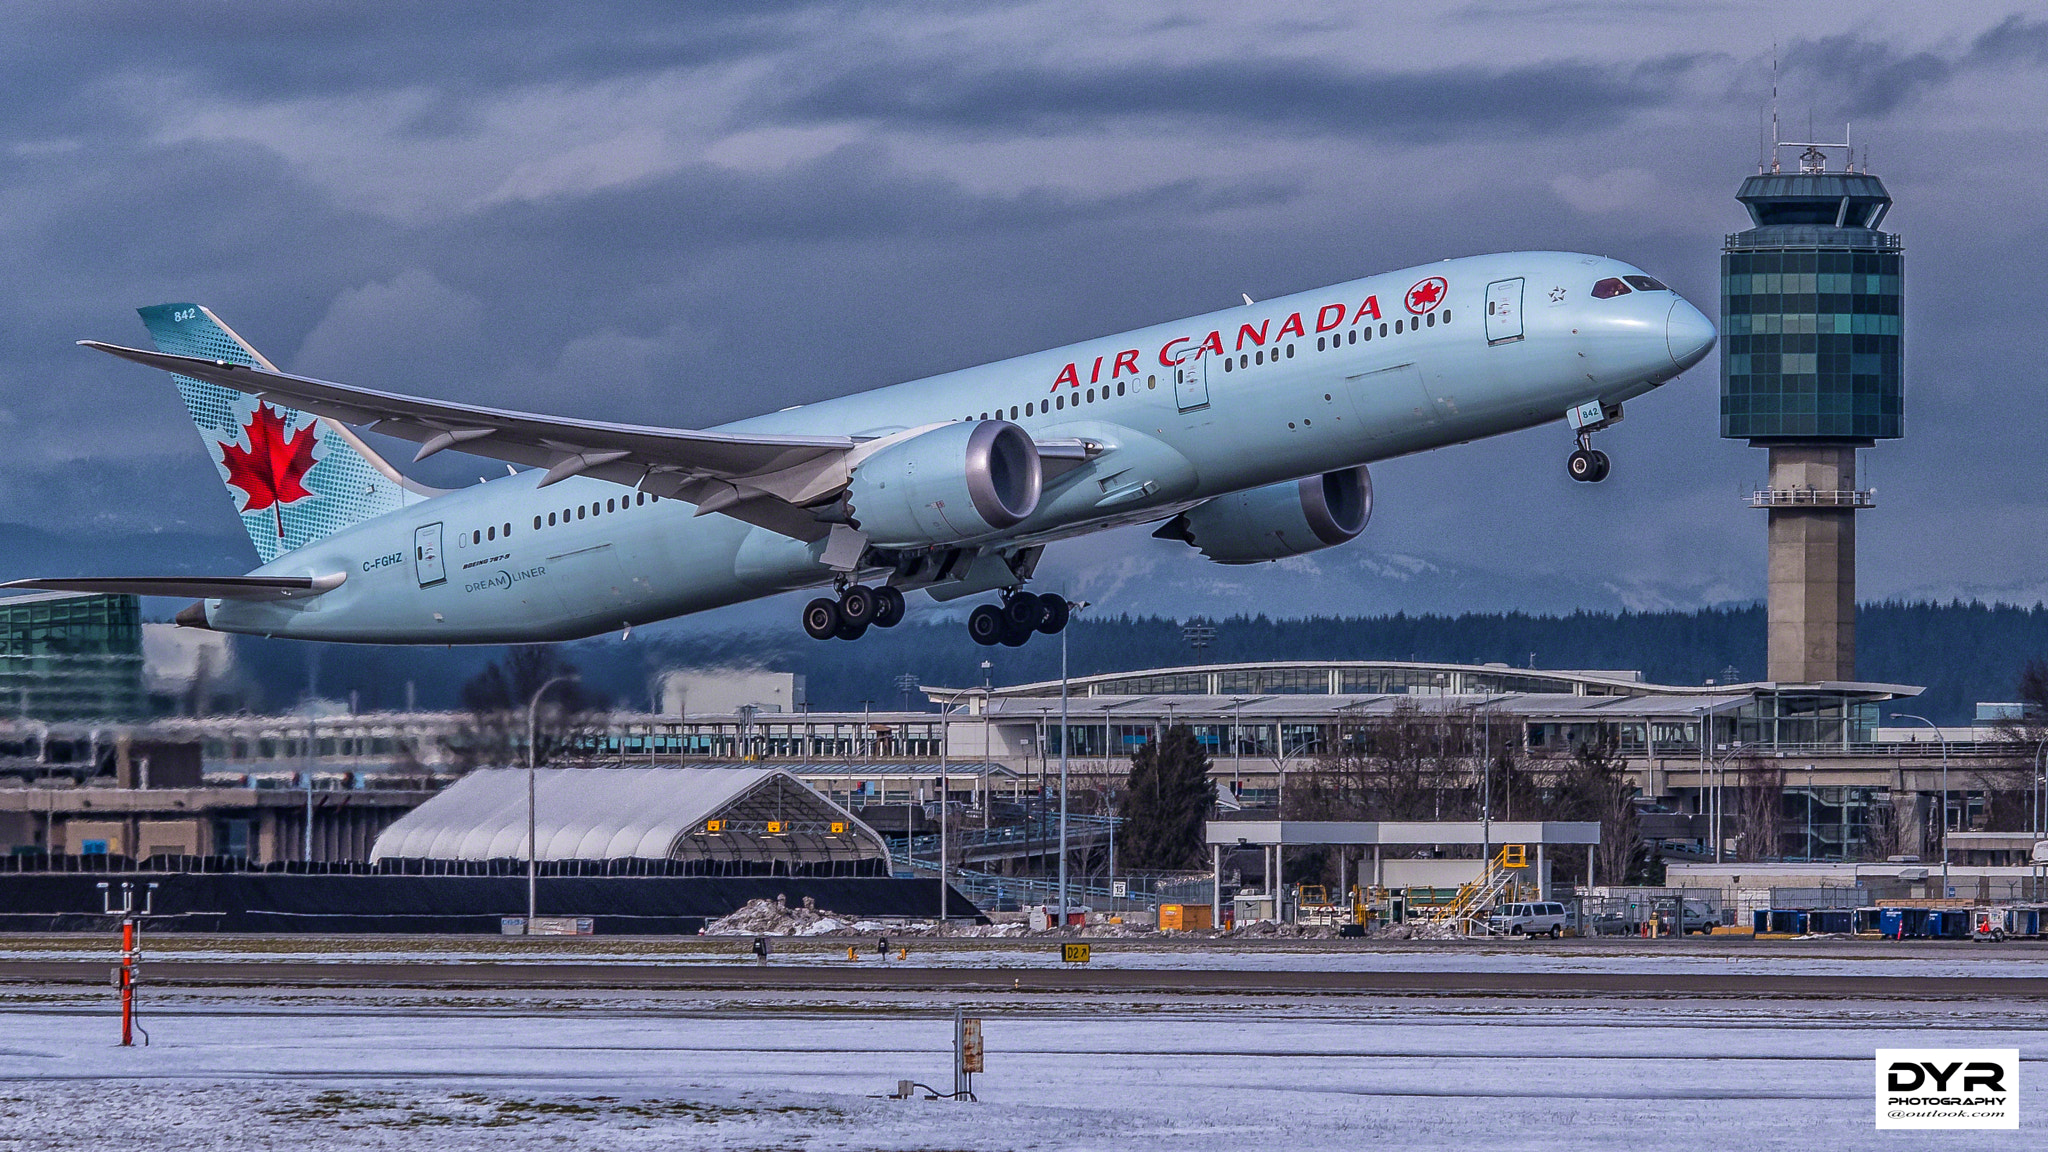 Pentax K-1 sample photo. Air canada departure at yvr airport, ca photography